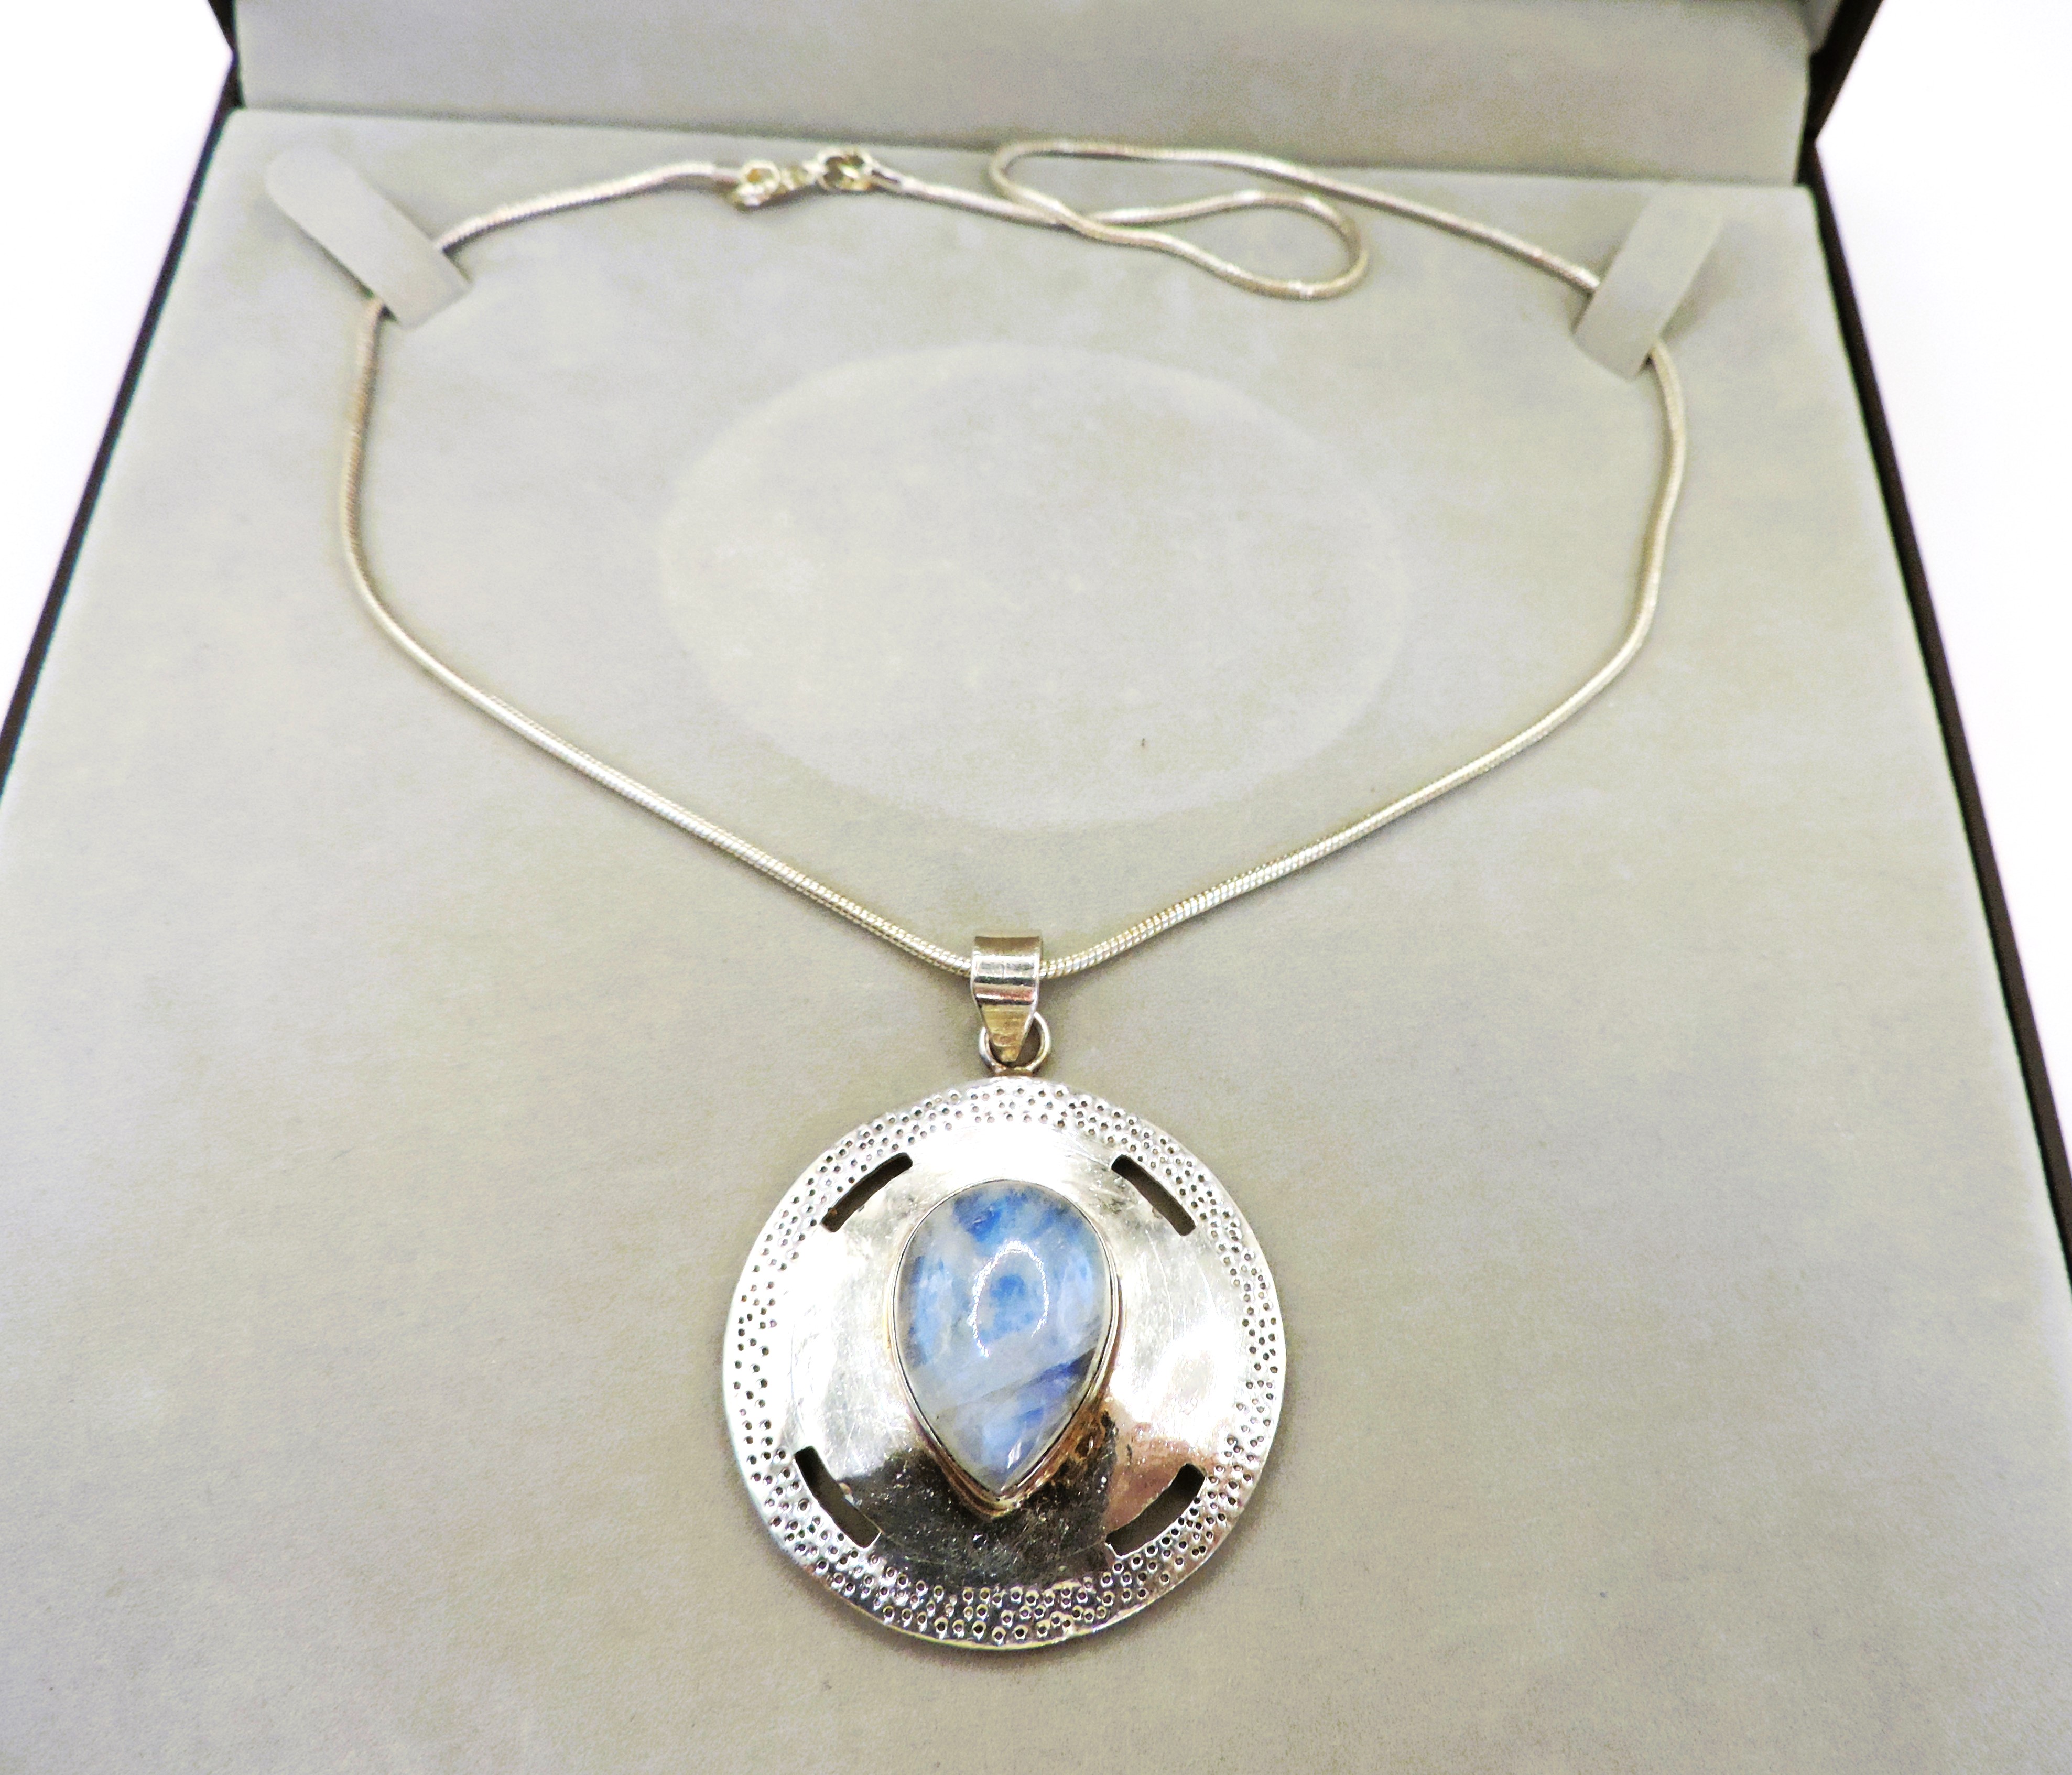 Artisan Sterling Silver Cabochon Teardrop Moonstone Necklace With Gift Box - Image 3 of 4